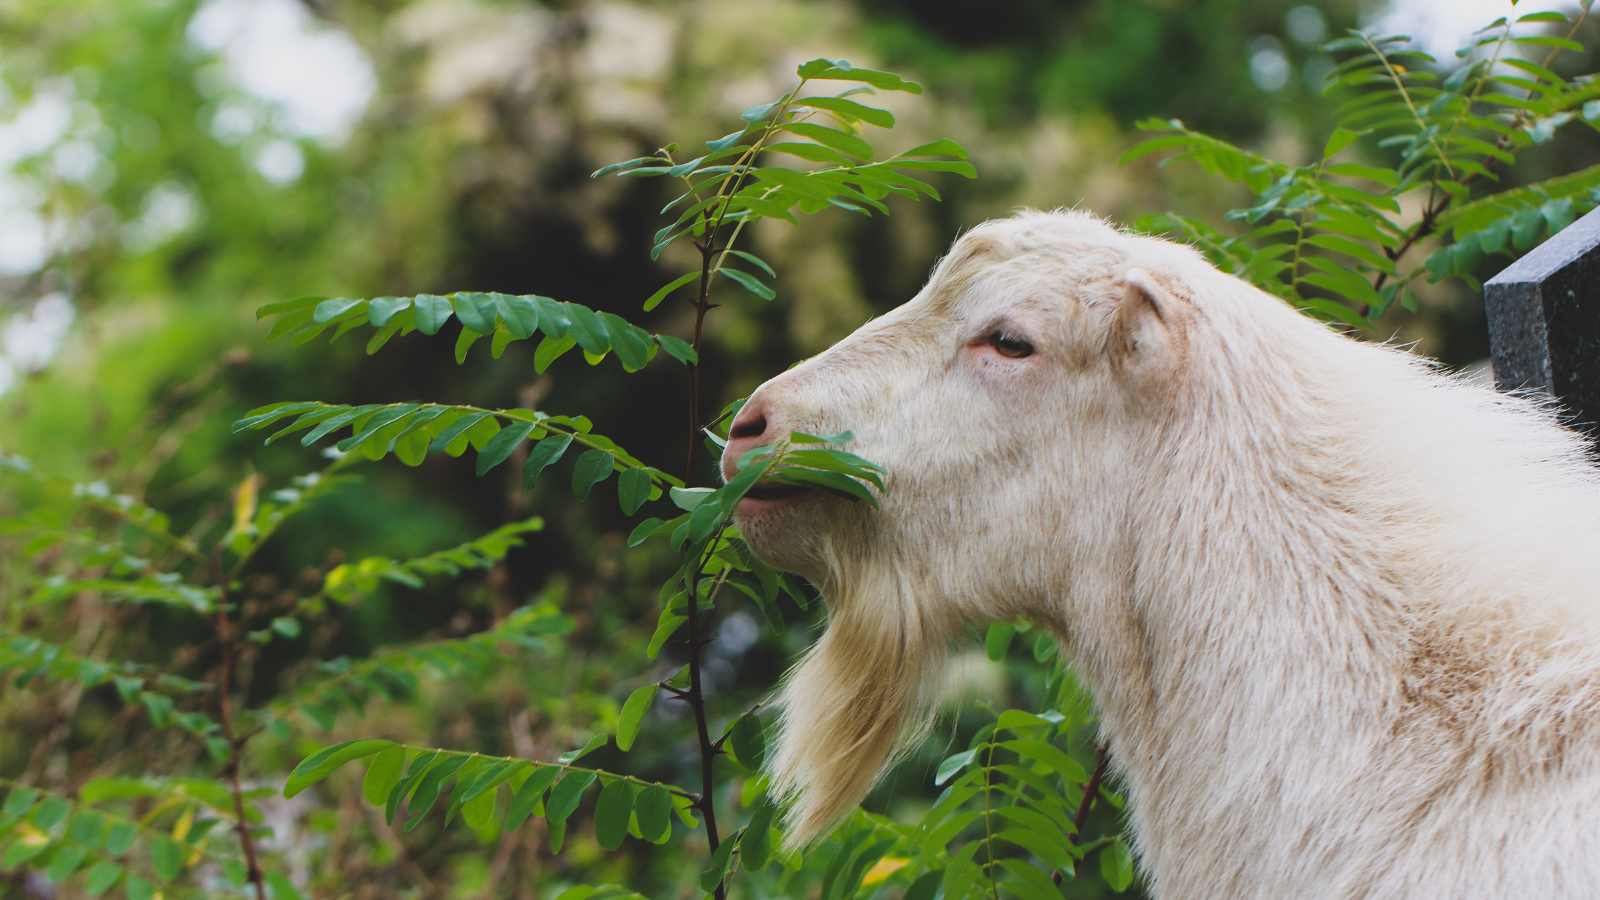 The head of a cream-beige-colored goat as it browses on forage.